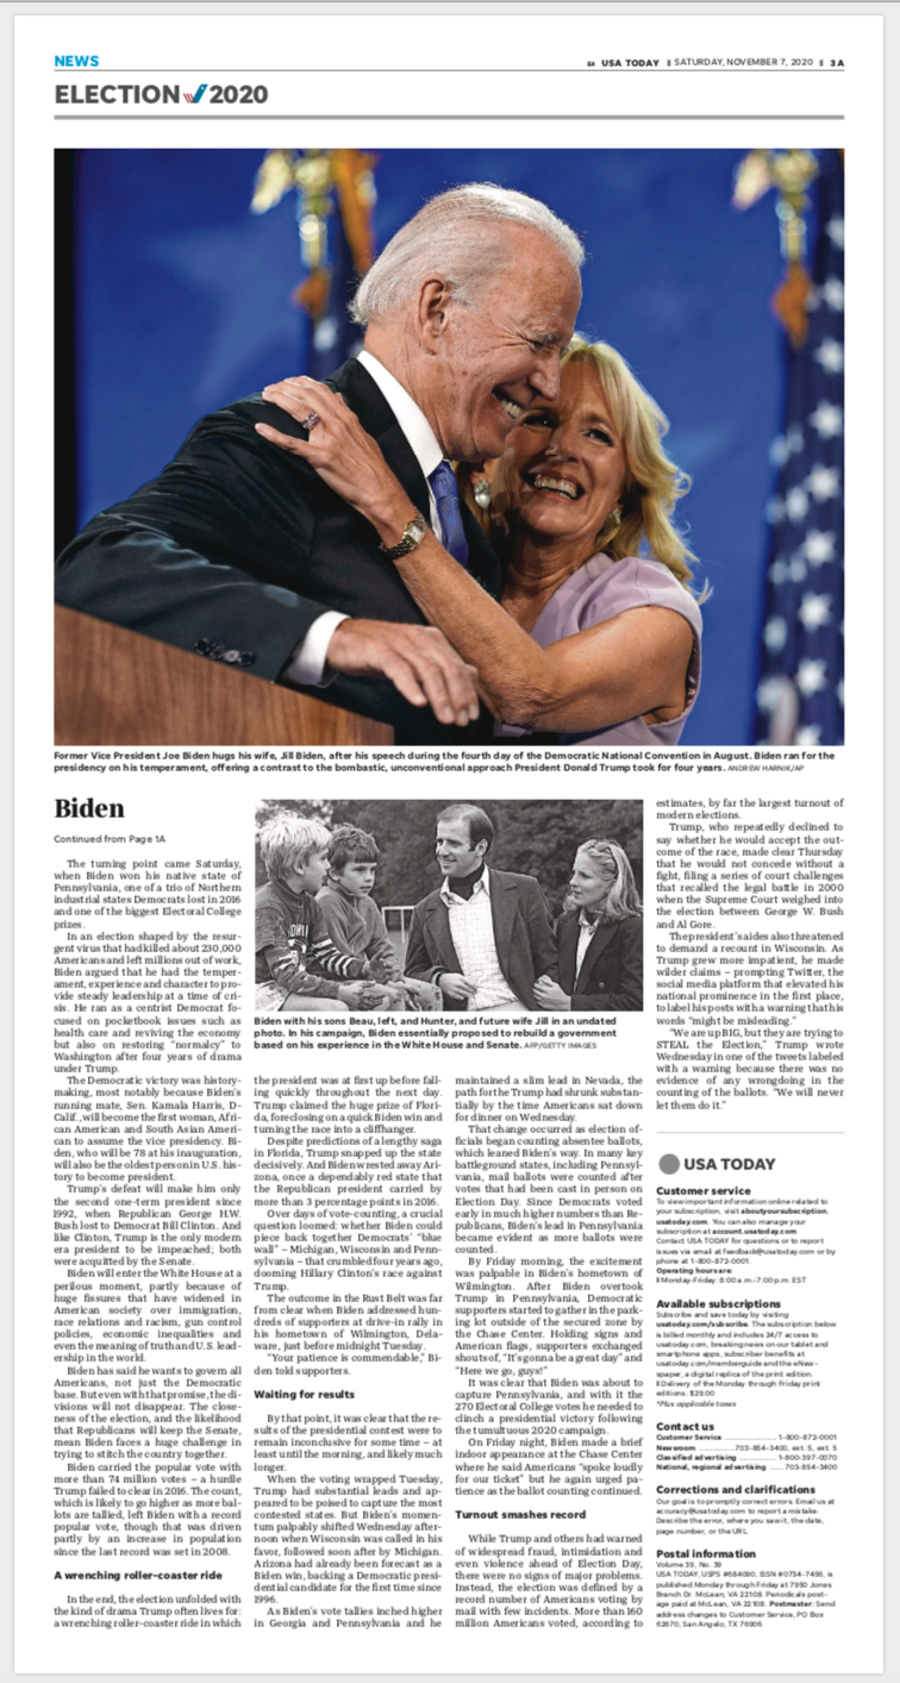 President-elect Joe Biden and wife Jill are featured in USA TODAY's special print edition, Saturday, Nov. 7, after the election.